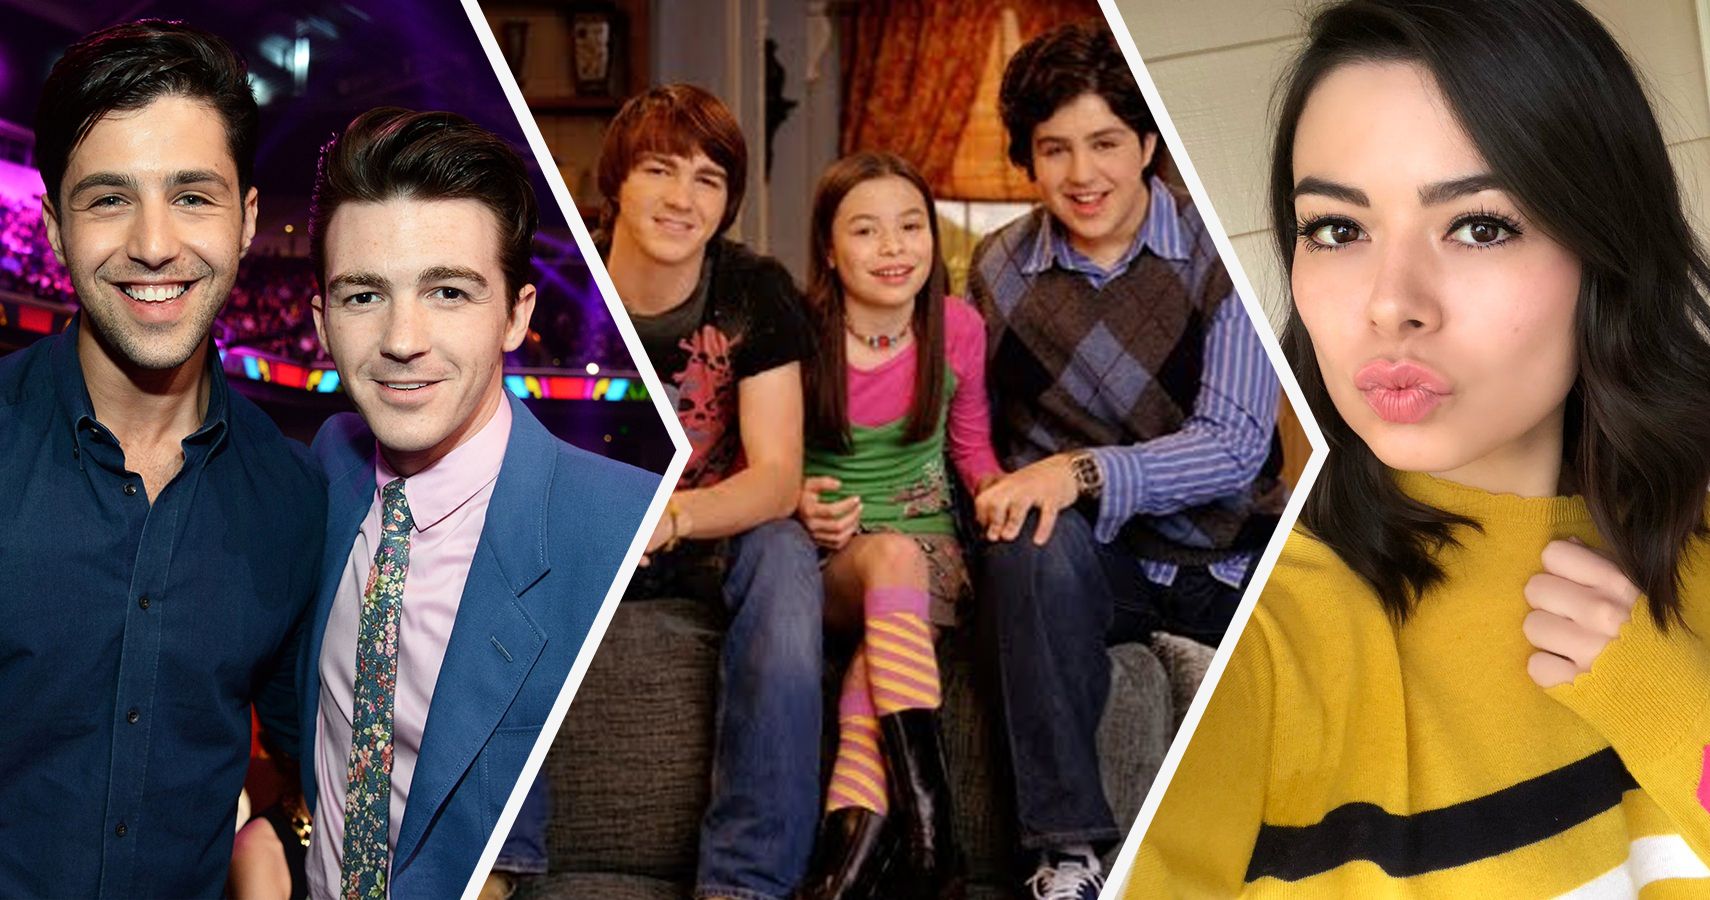 Drake And Josh What The Cast Looked Like In The First Episode Vs Now